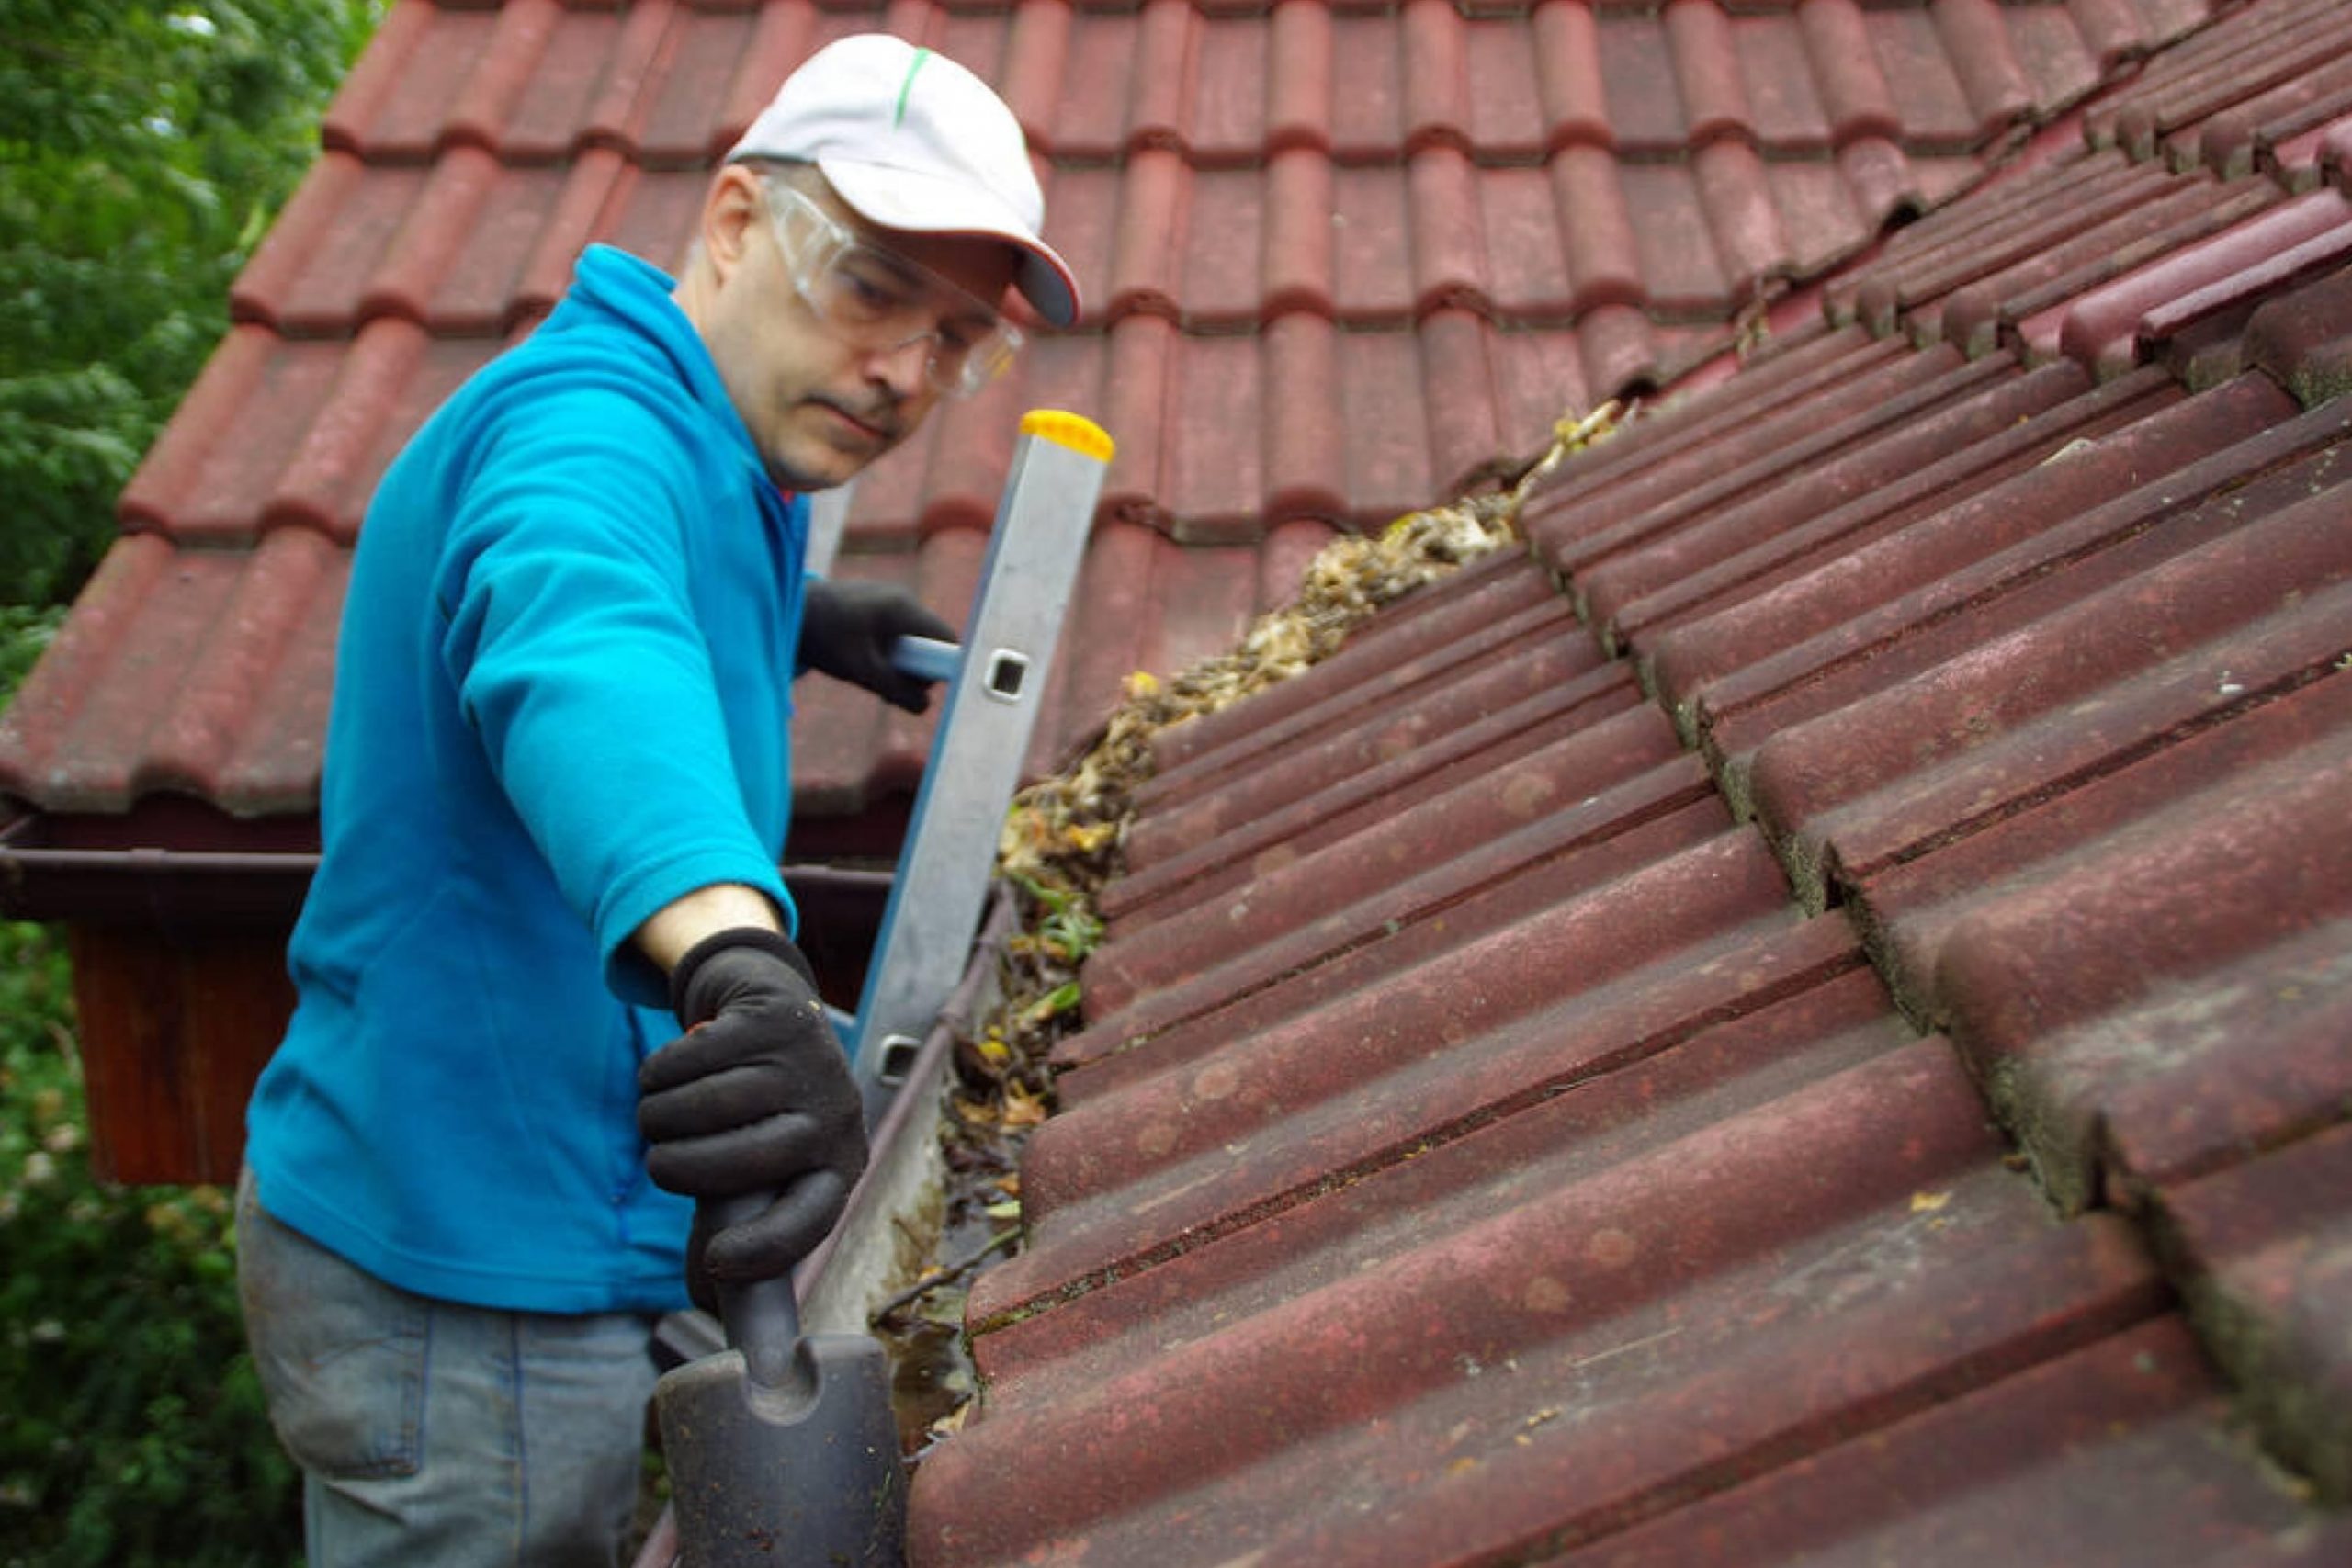 How to Get Leaves Off Your Roof?